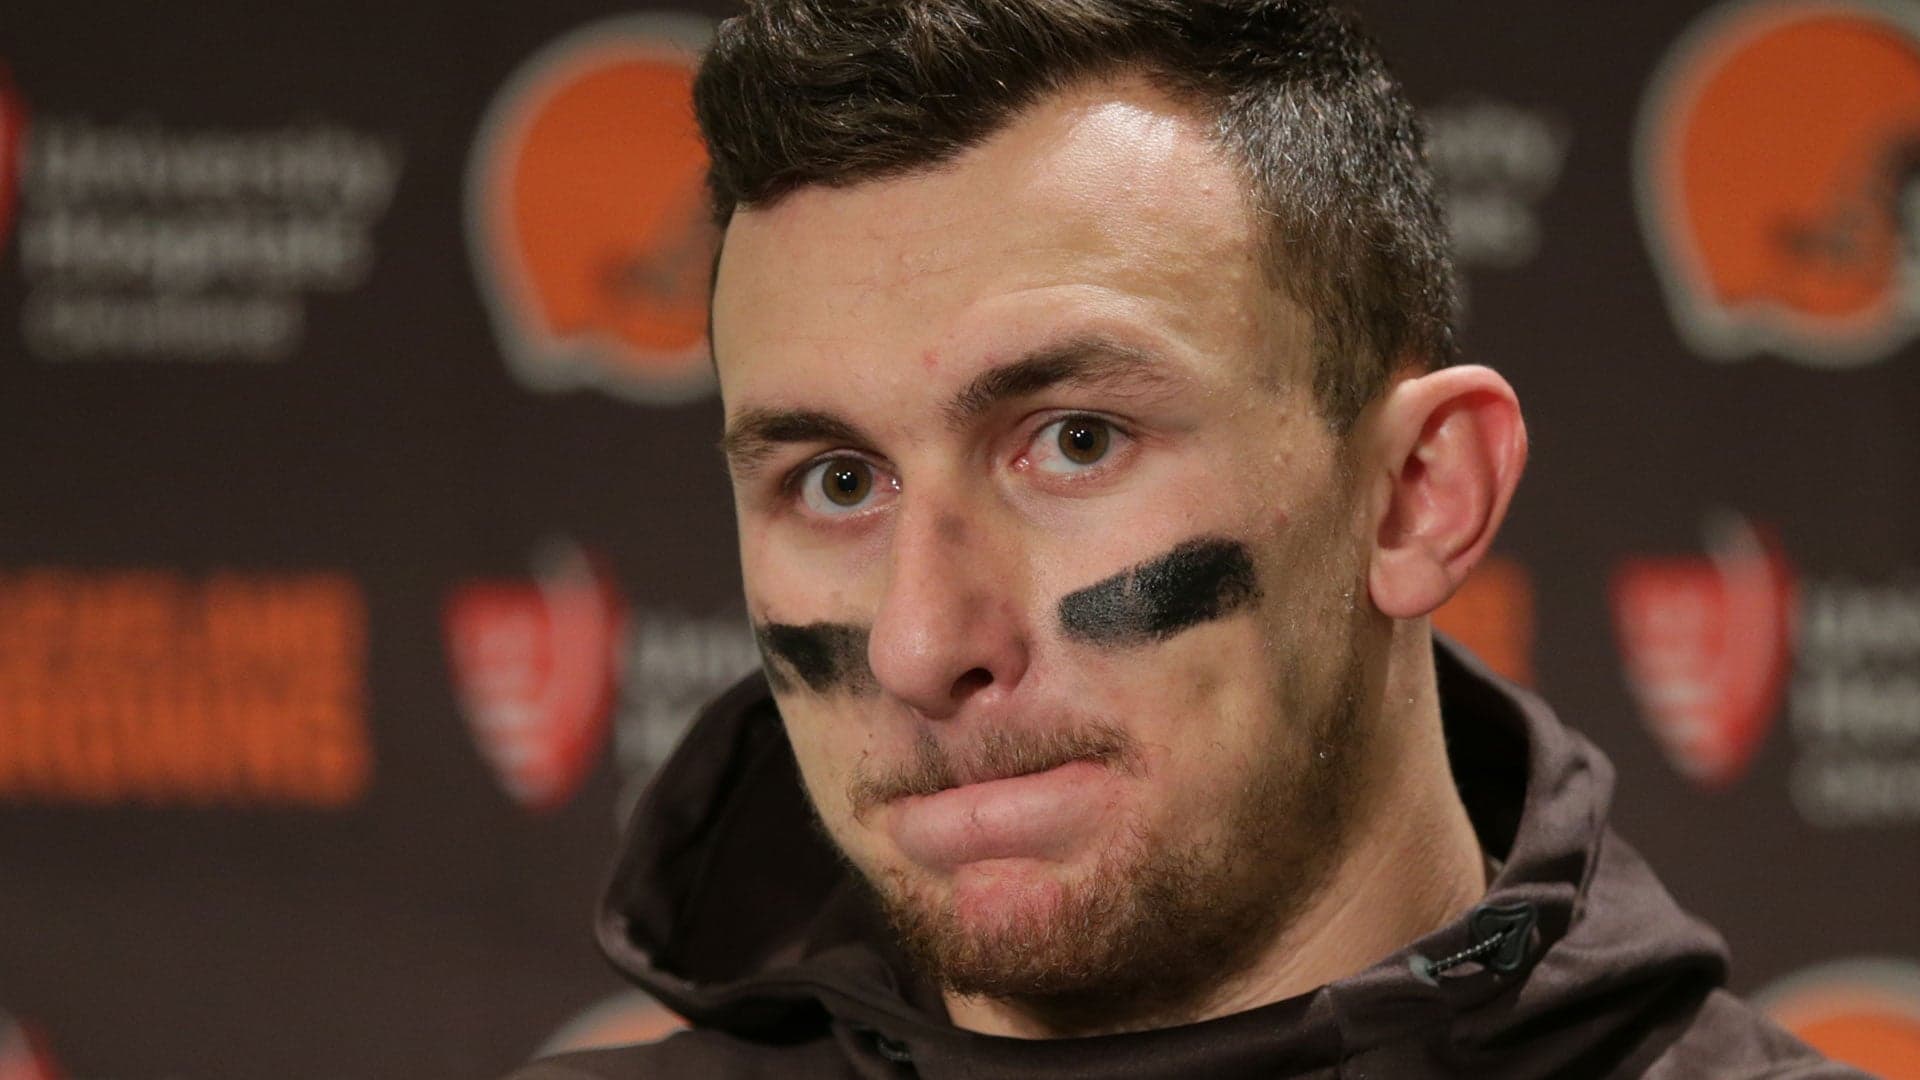 Disgraced NFL Player Johnny Manziel Involved in Hit-and-Run Accident